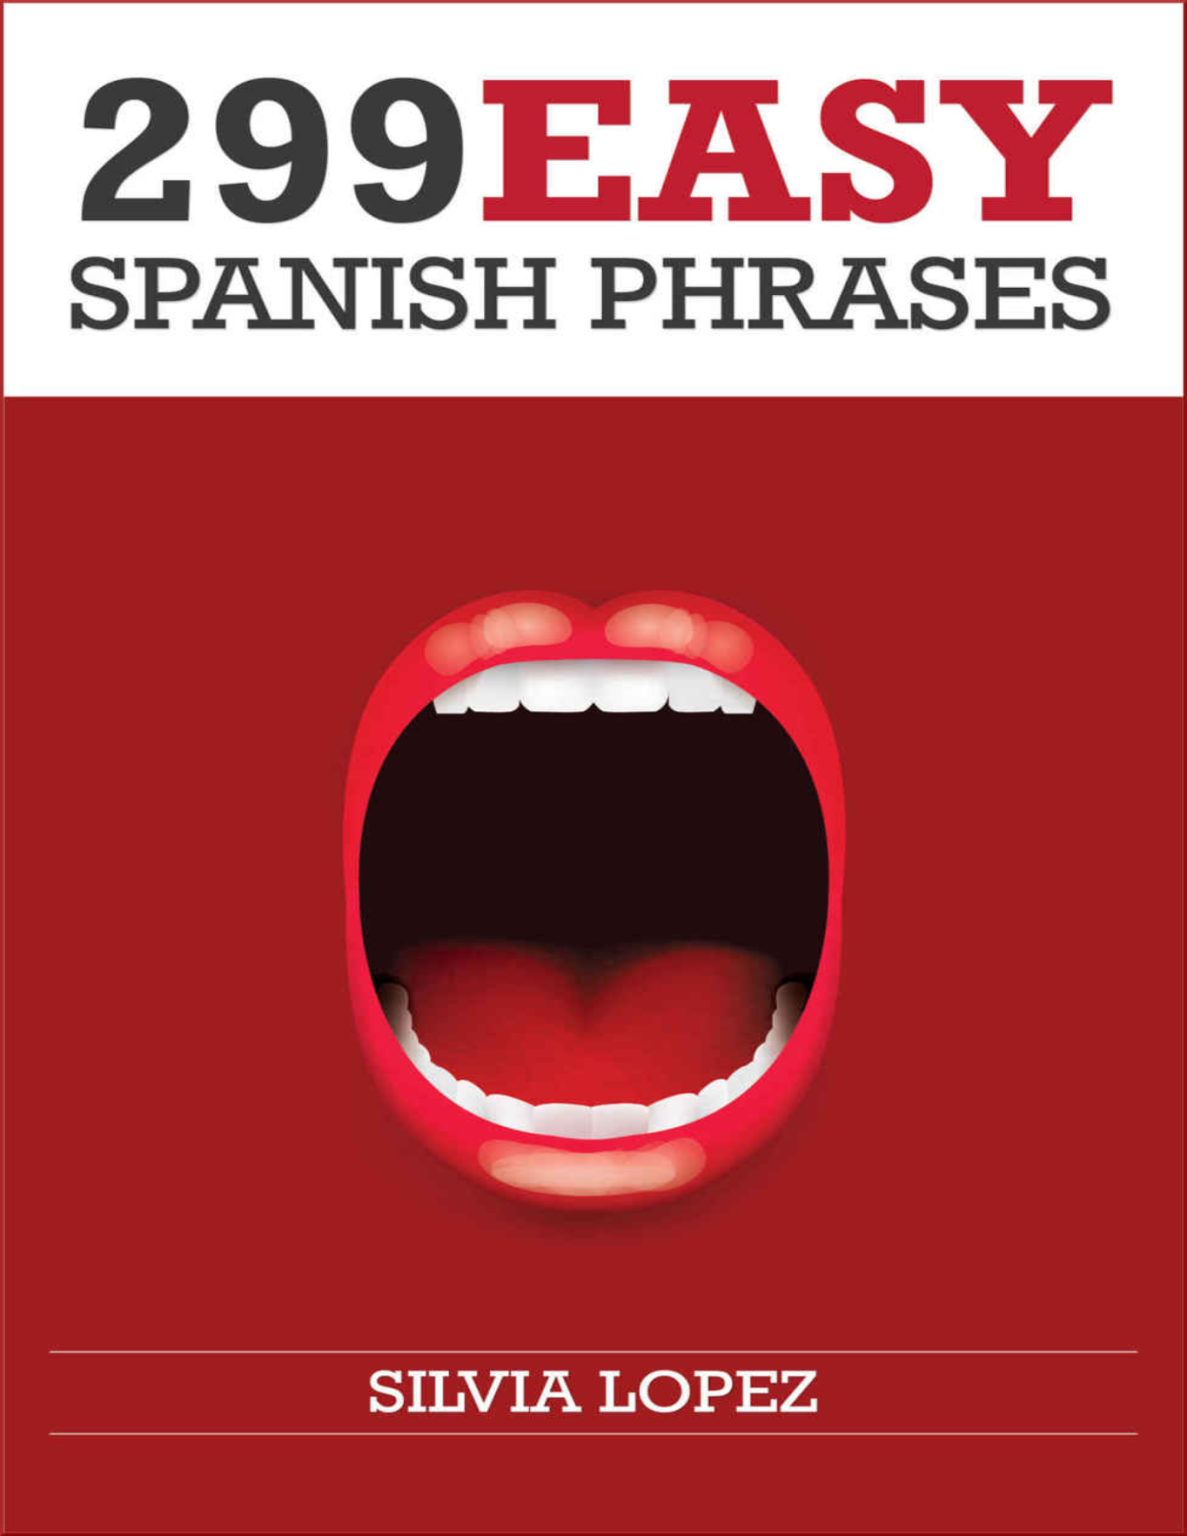 Rich results on Google's SERP when searching for ''299-Easy-Spanish-Phrases''